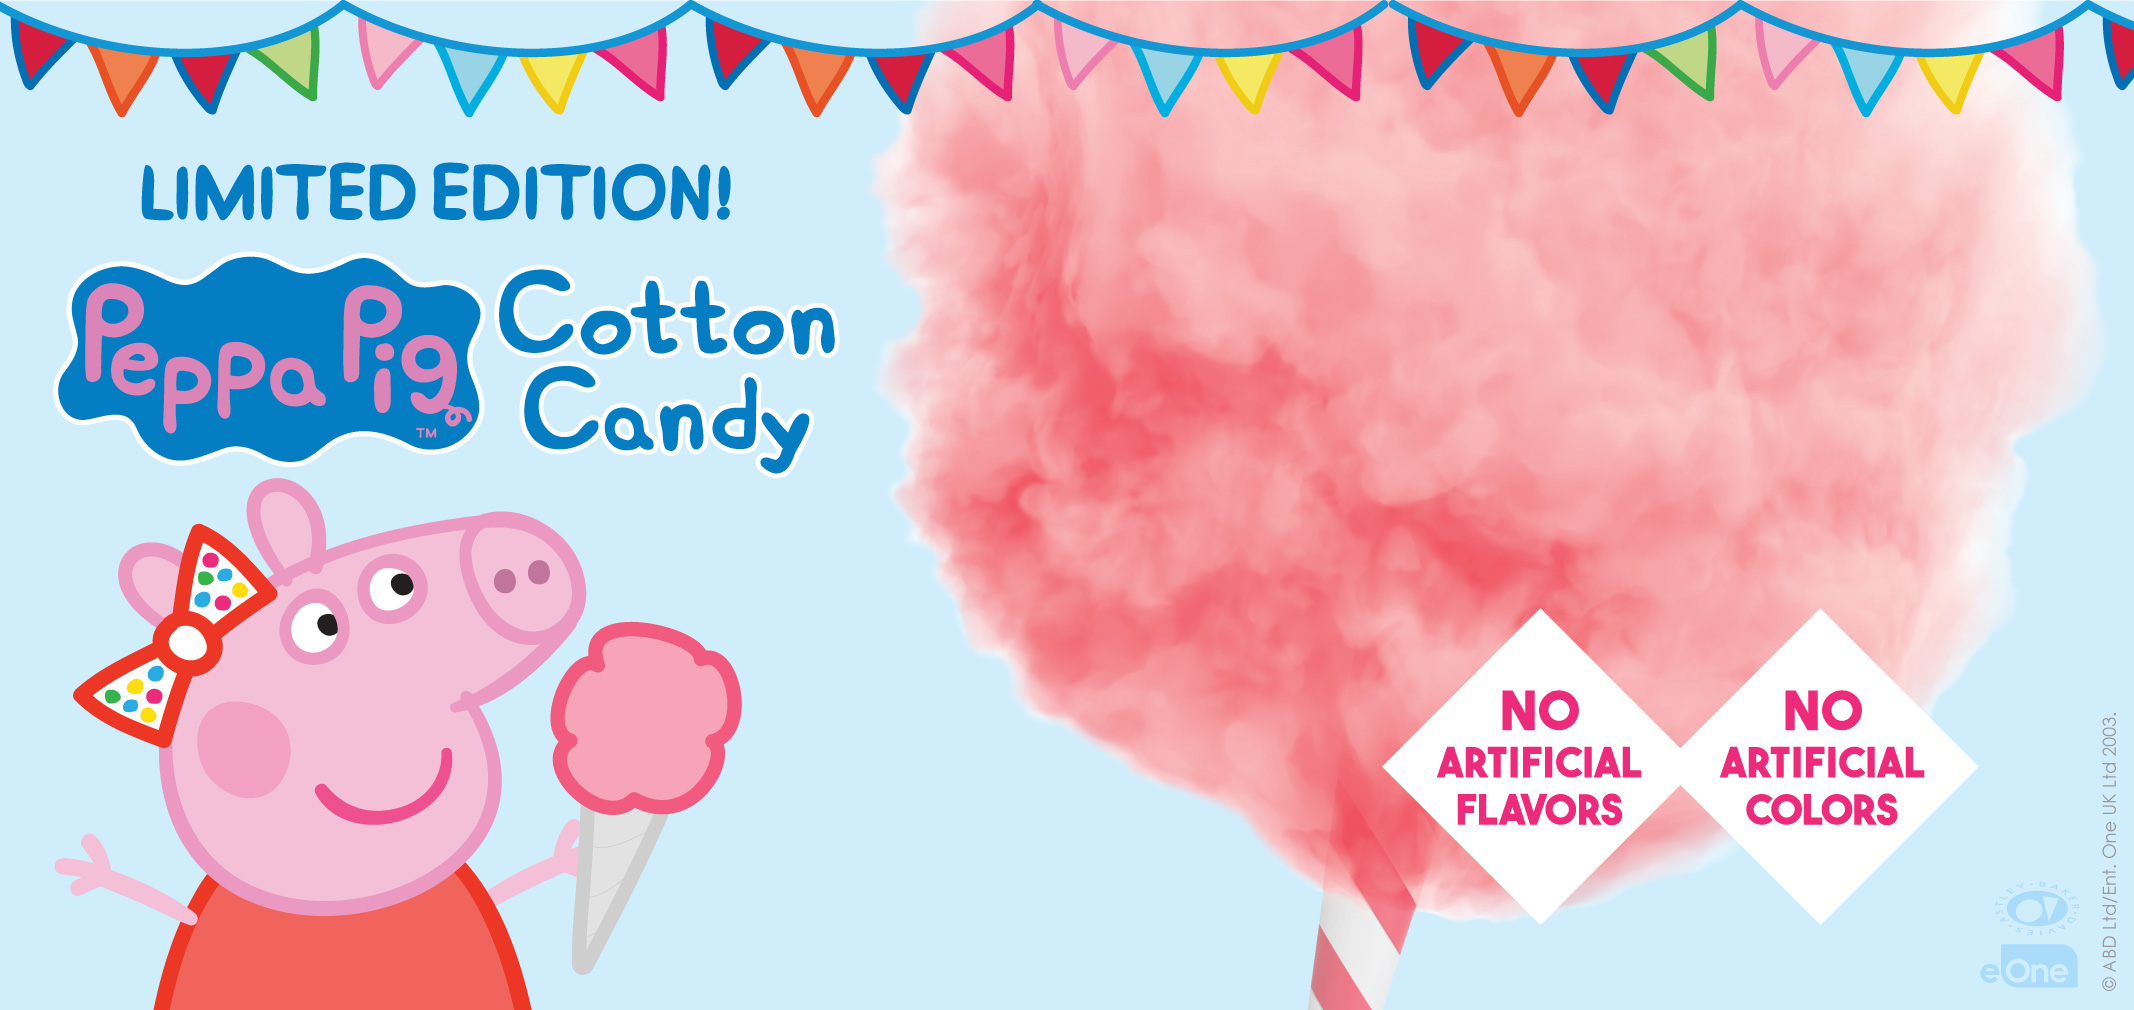 Peppa Pig's Cotton Candy label image